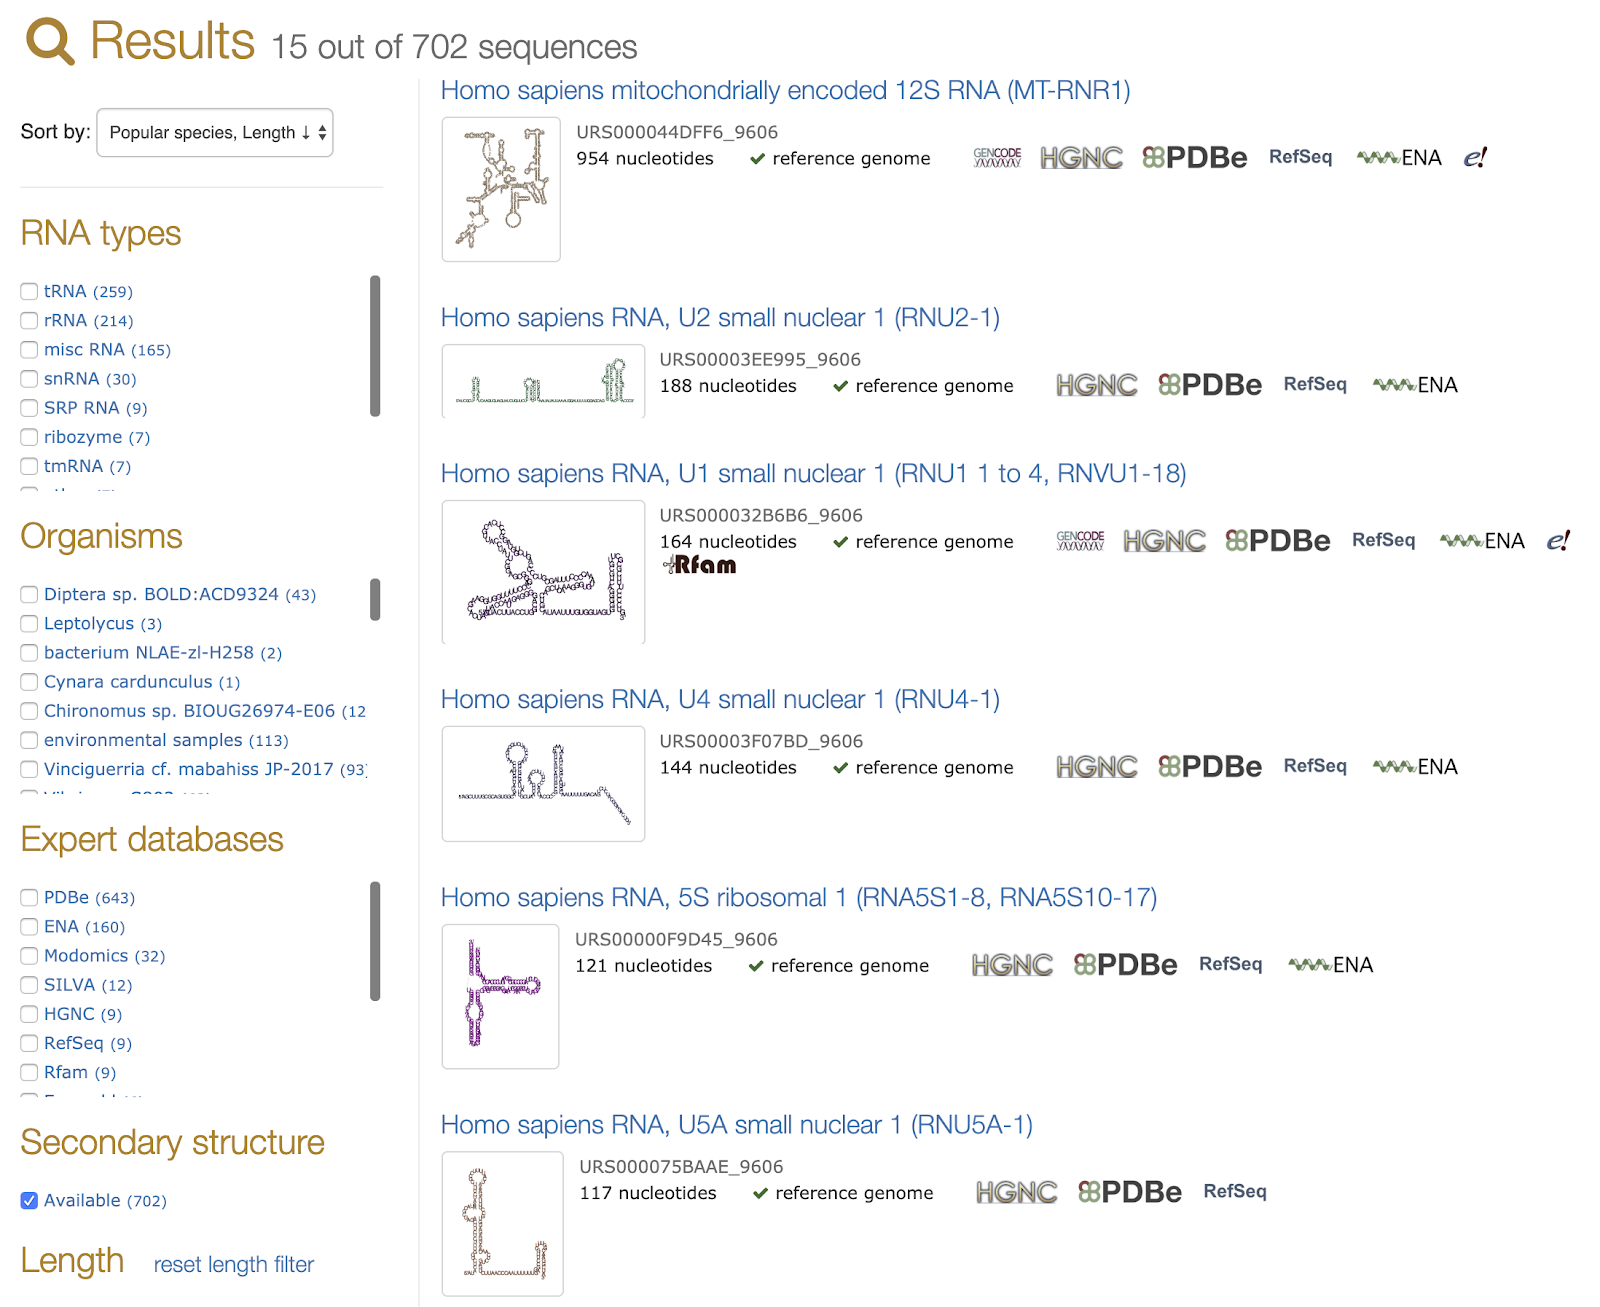 R2DT in RNAcentral search results